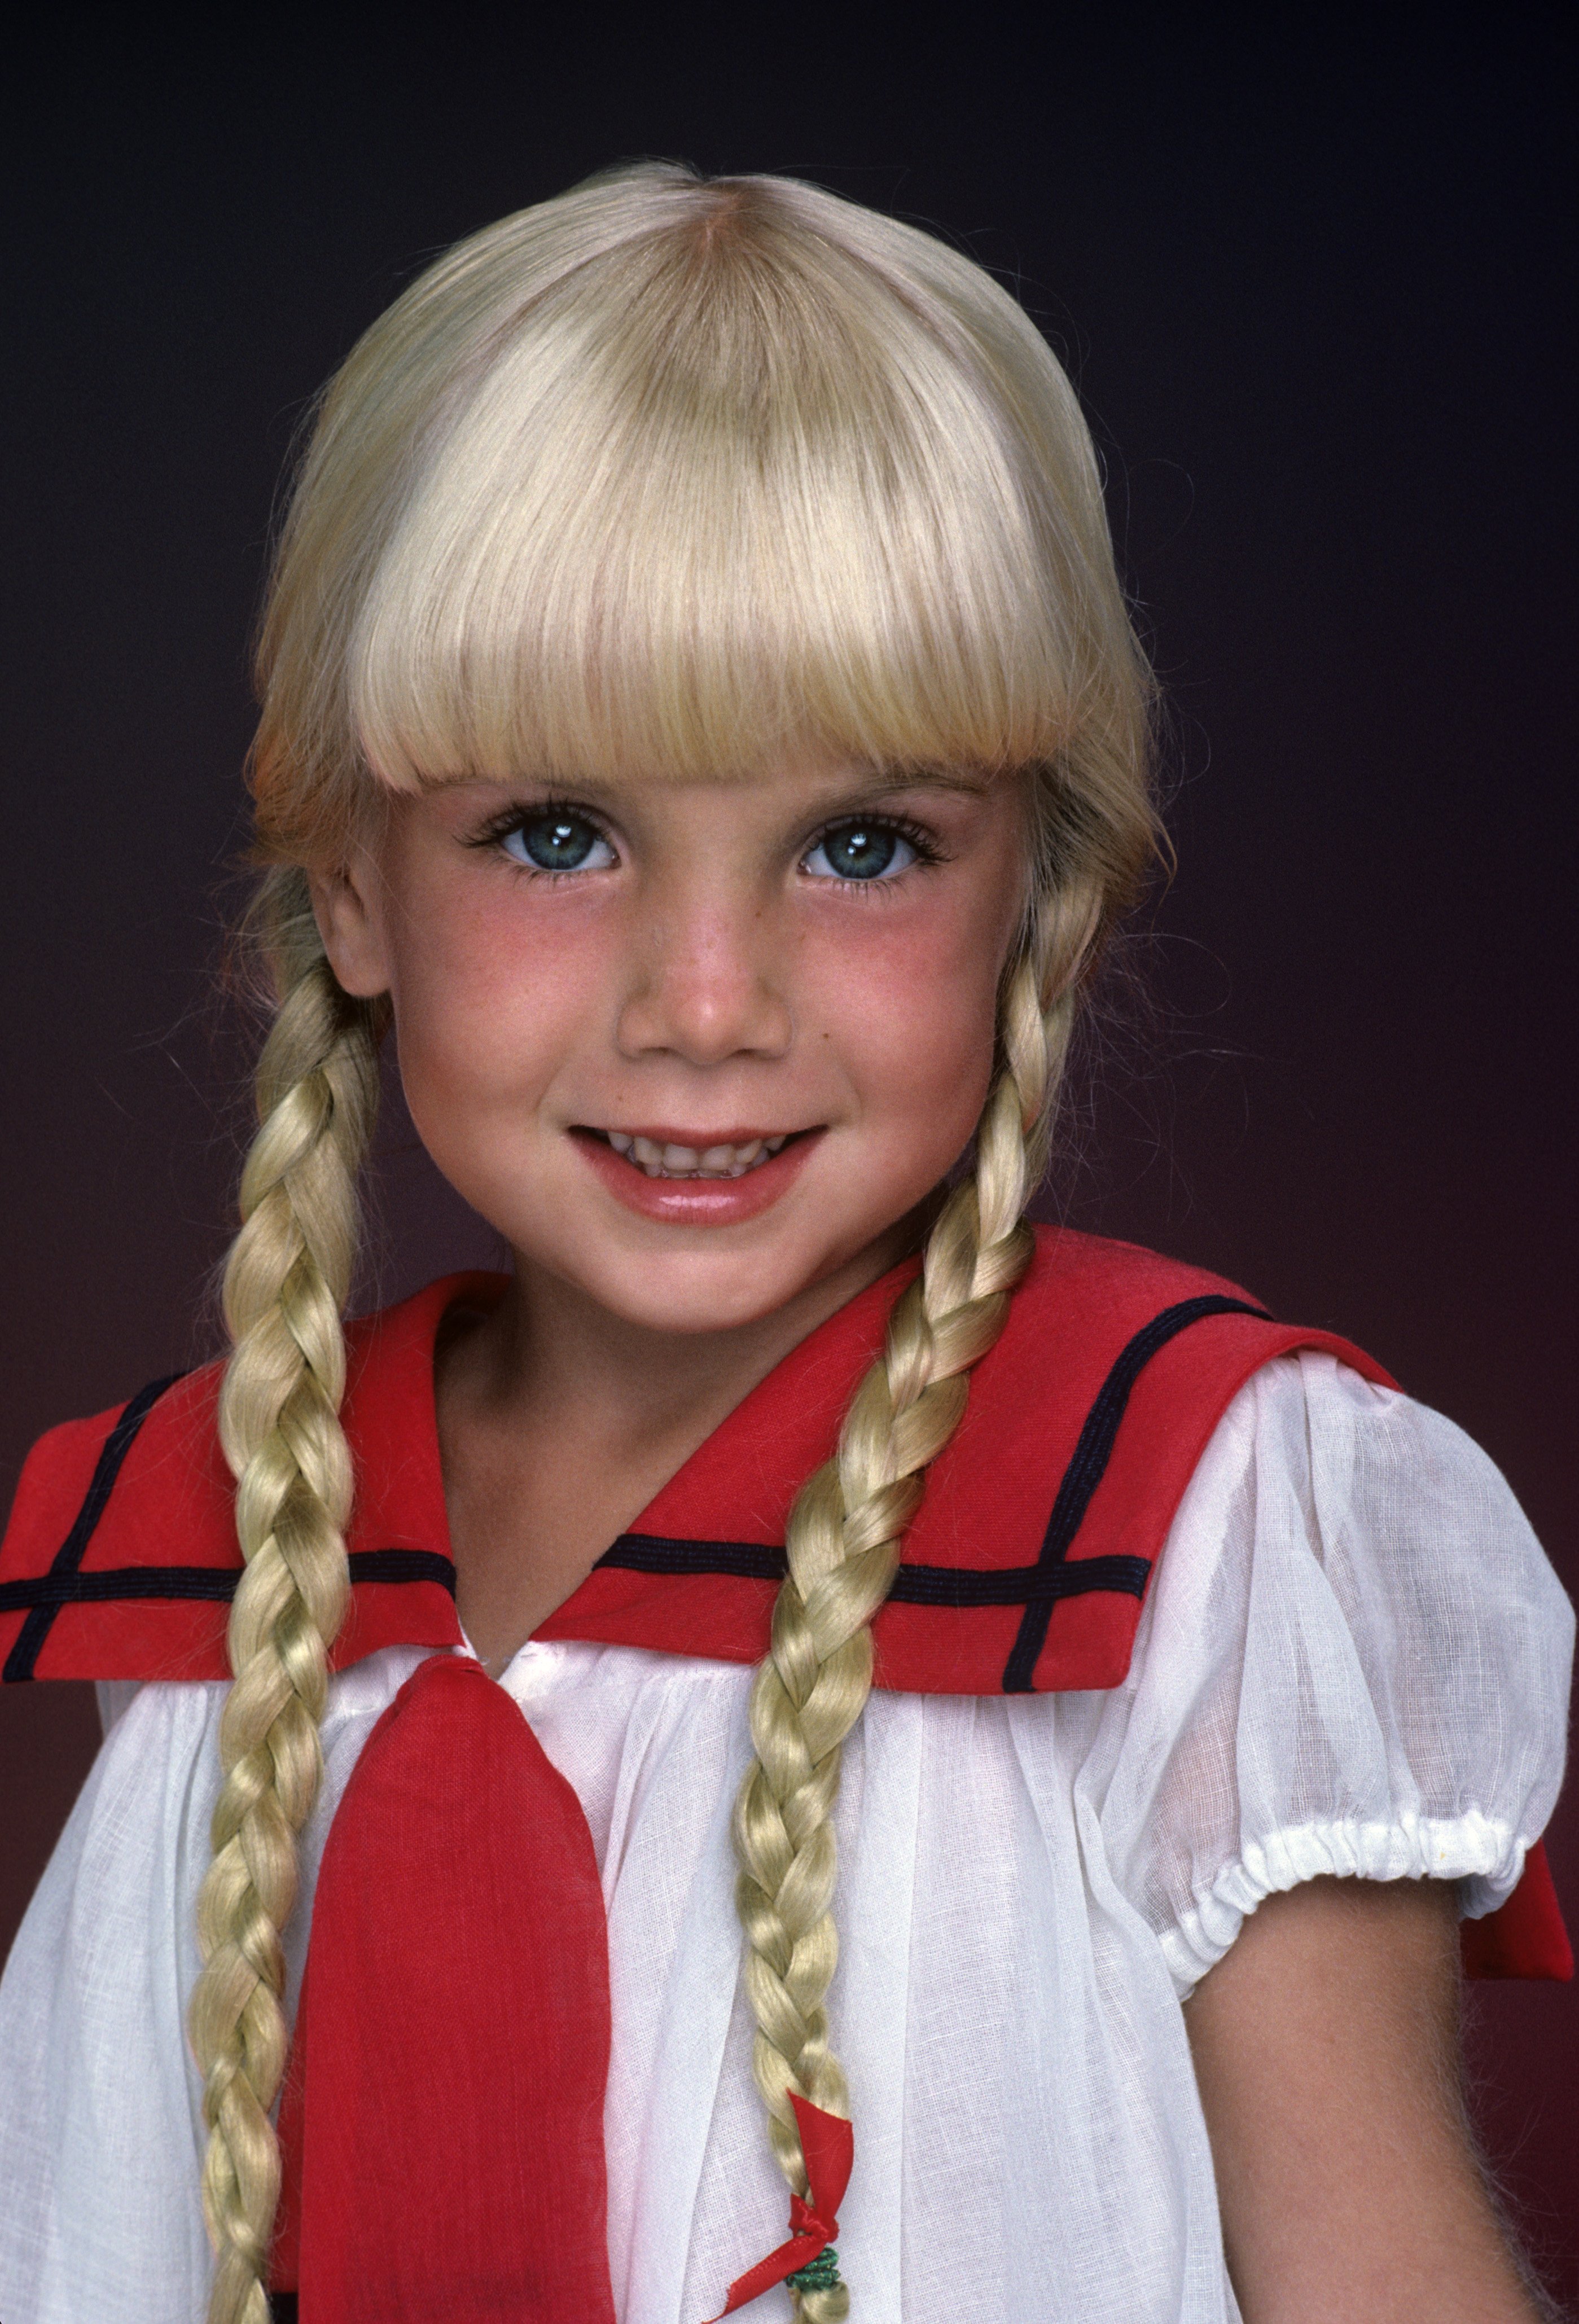 Heather O'Rourke dans "Happy Days" | Photo : Getty Images